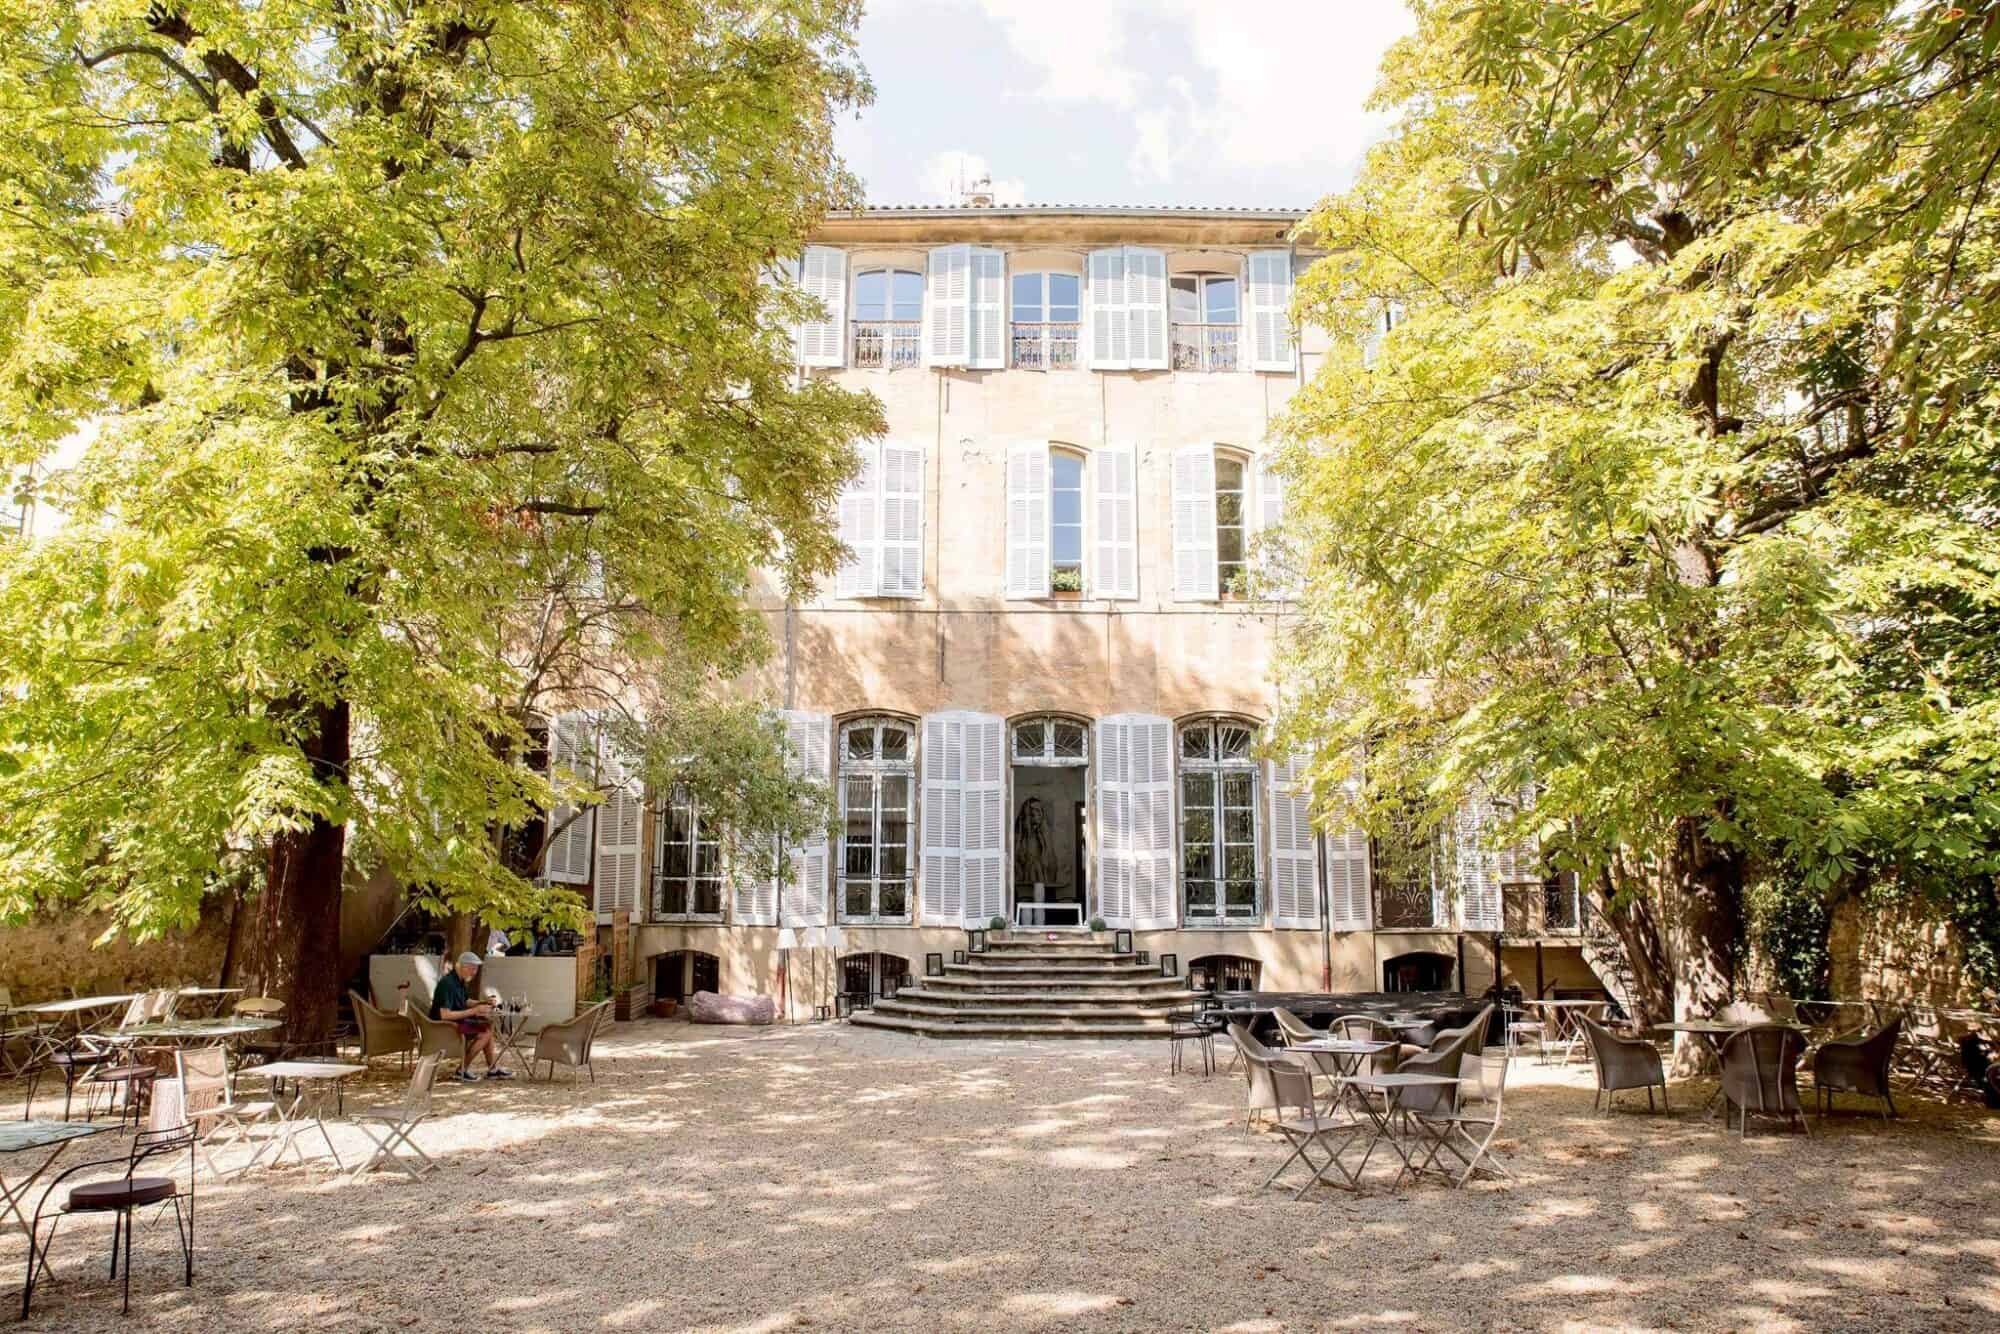 How to Spend a Weekend in Aix-en-Provence